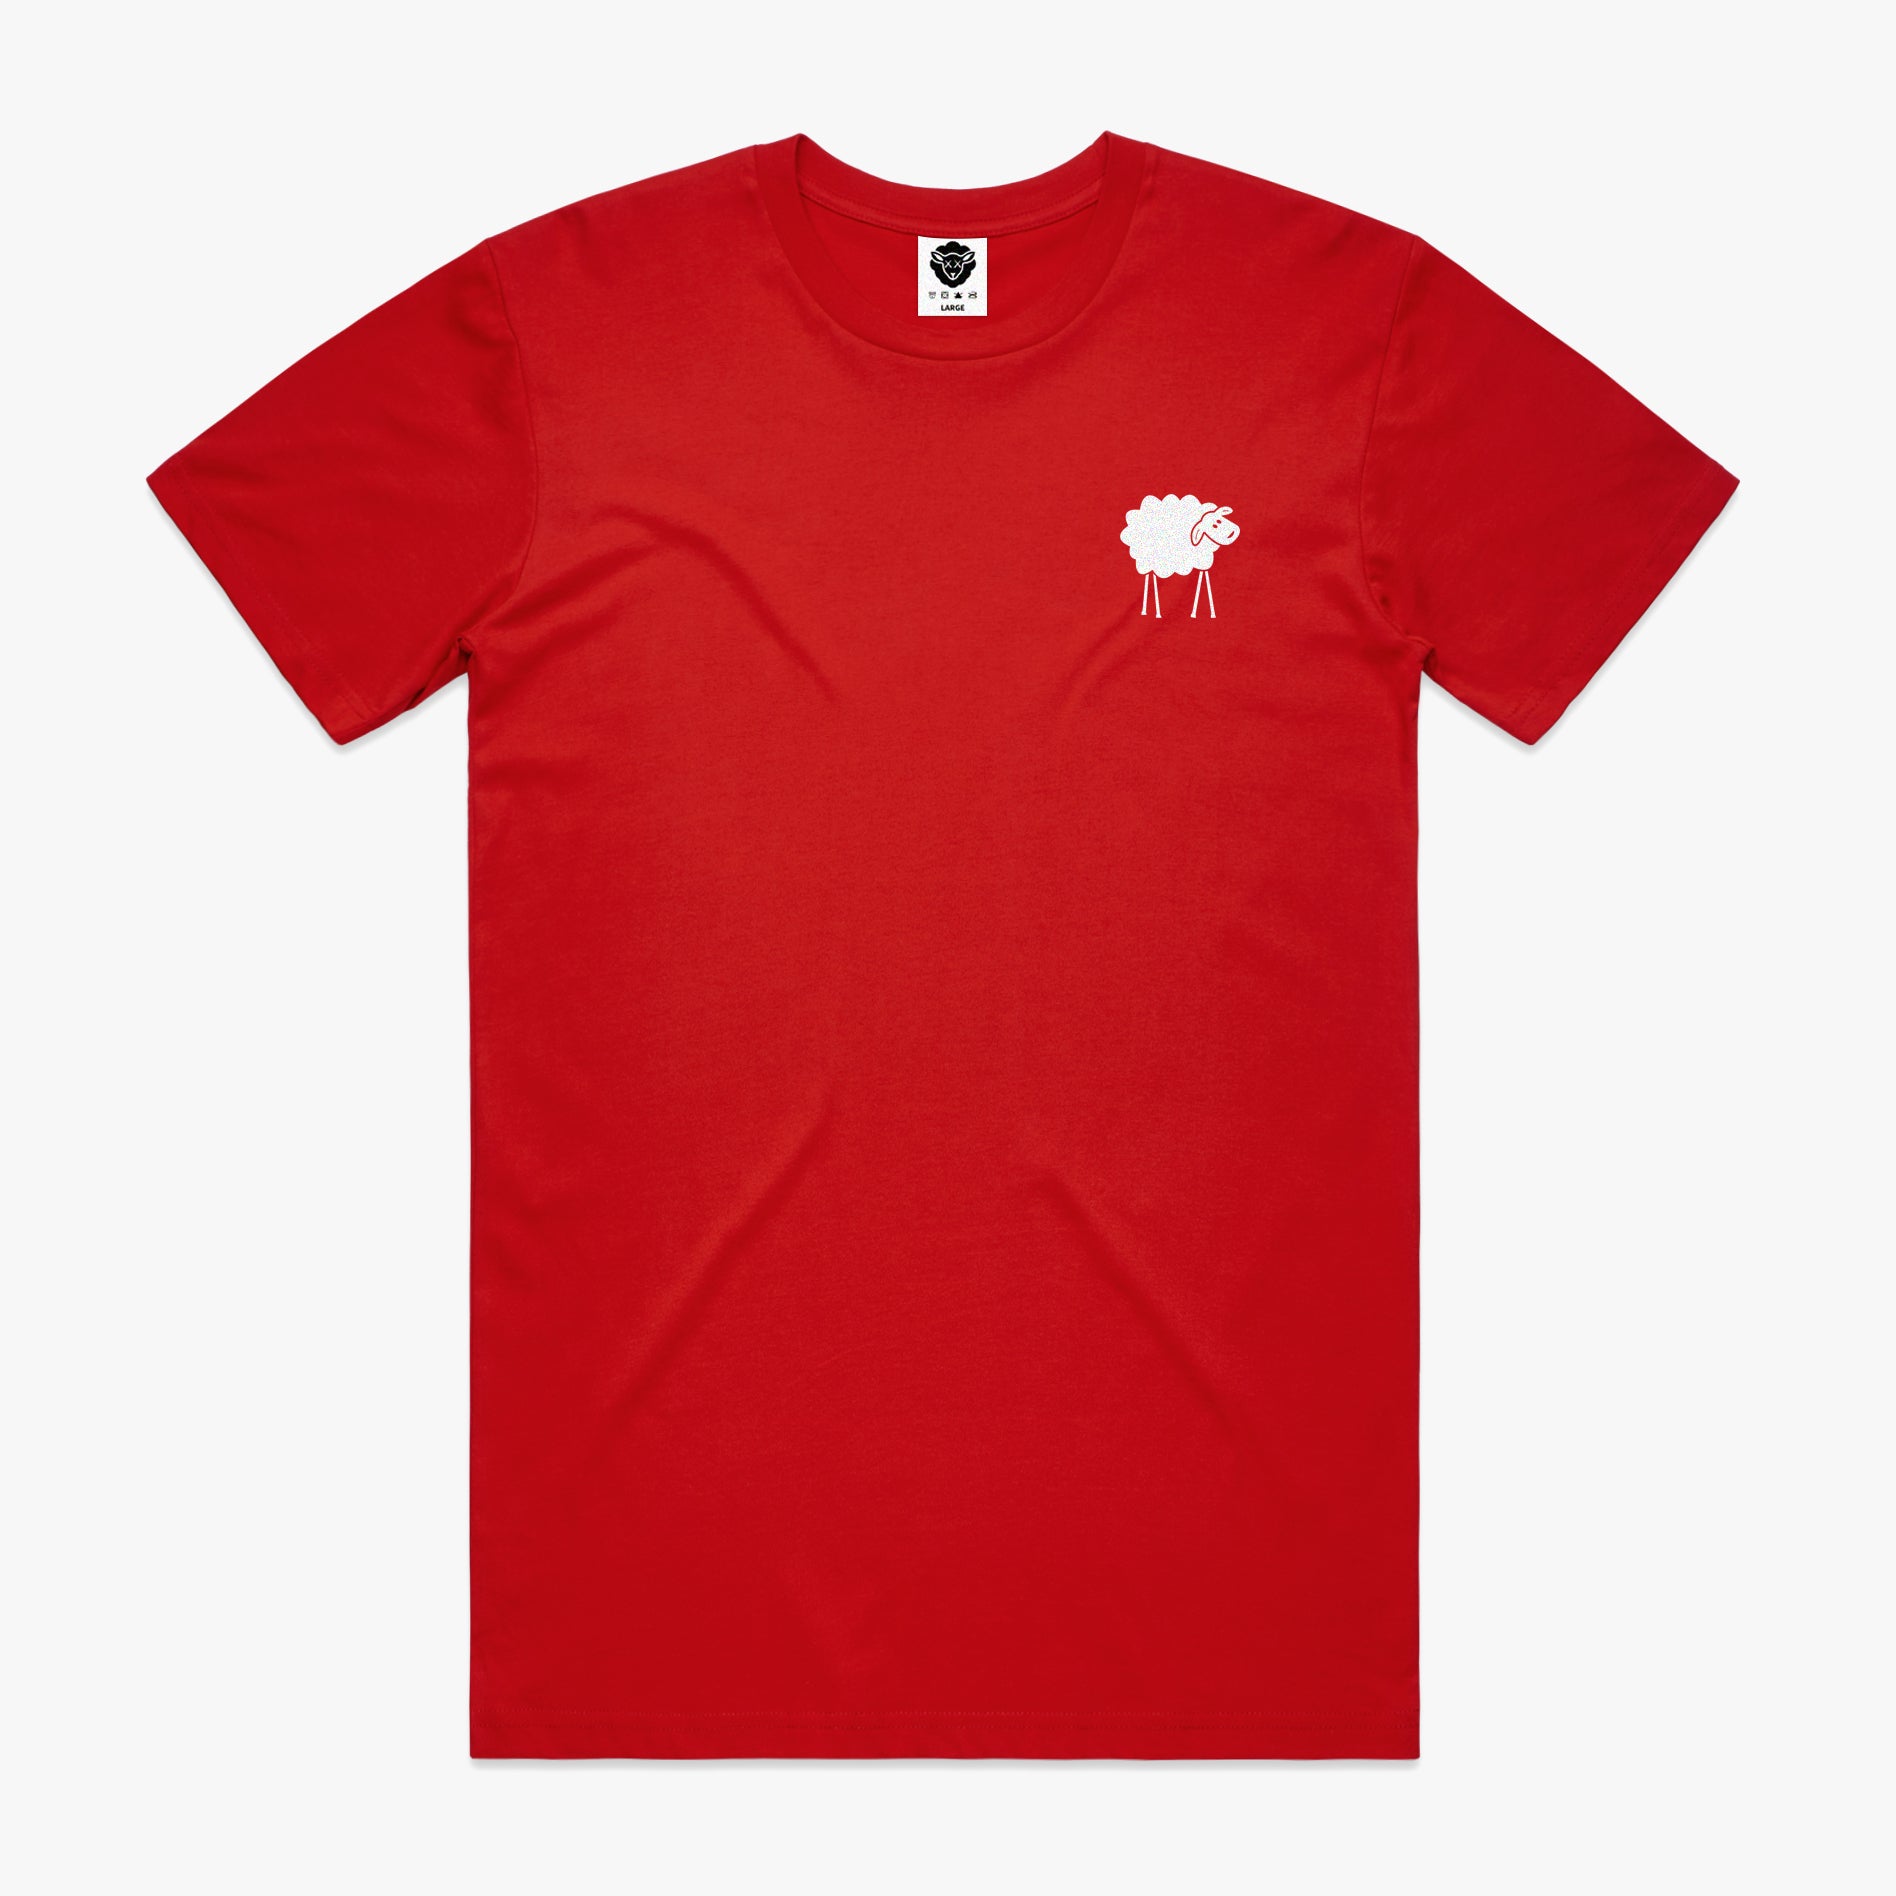 SHEEPEY OG Tee Red